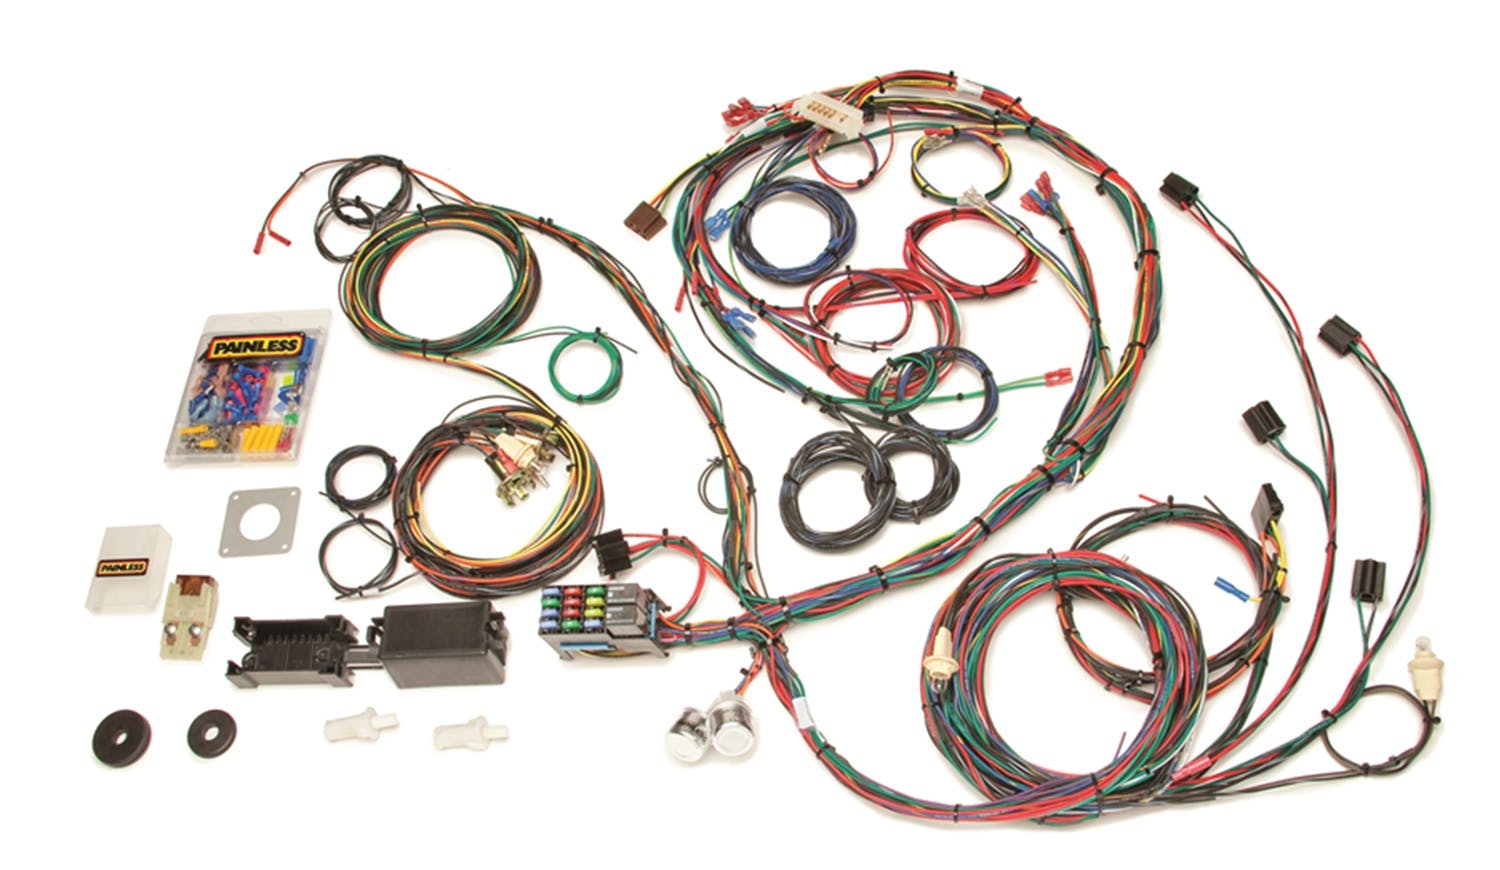 Painless 20122 22 Circuit Wiring Harness